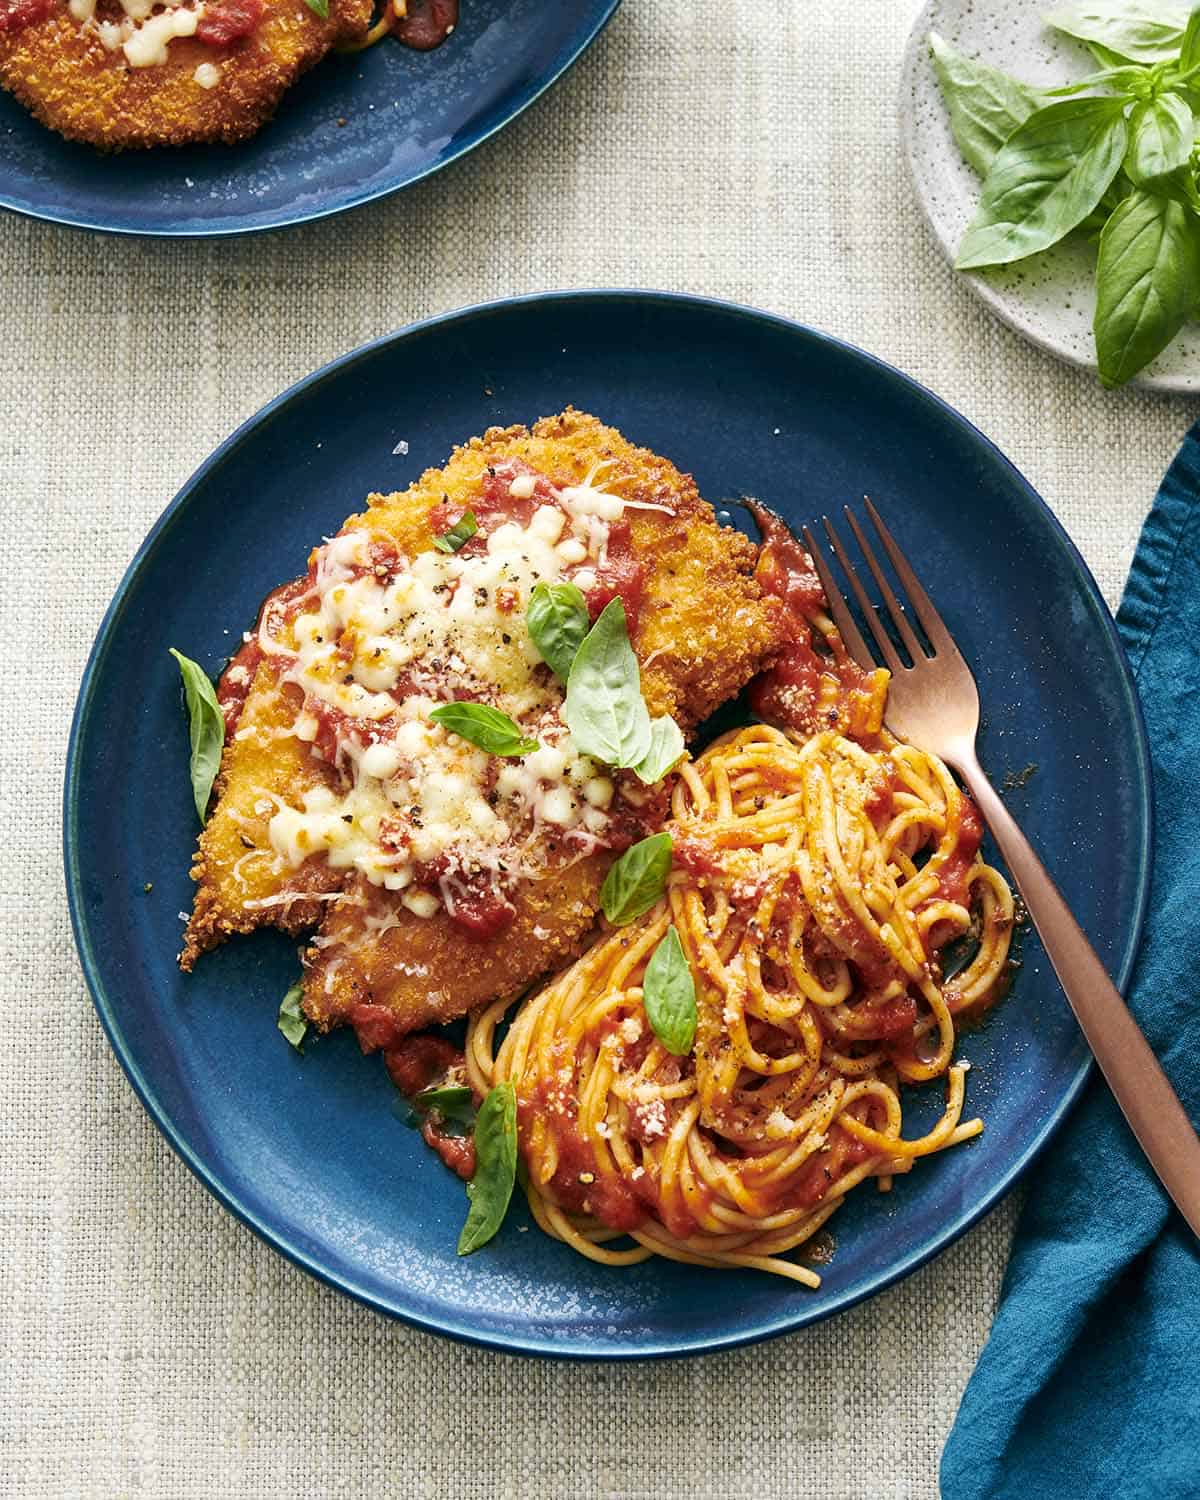 A photo of chicken parmesan with spaghetti on a blue plate.